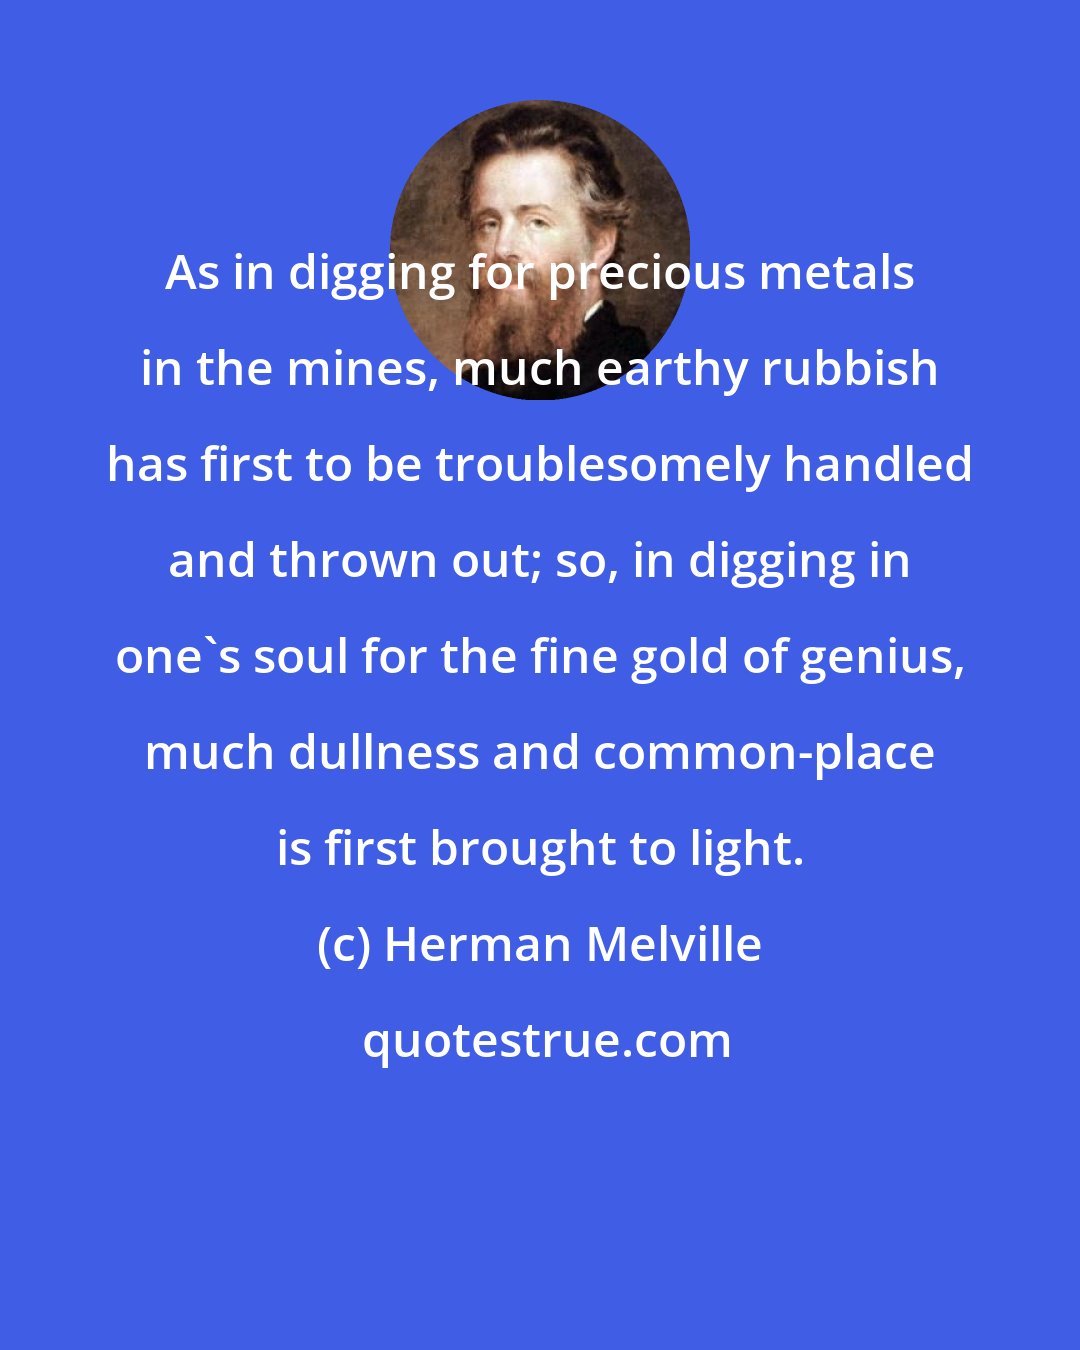 Herman Melville: As in digging for precious metals in the mines, much earthy rubbish has first to be troublesomely handled and thrown out; so, in digging in one's soul for the fine gold of genius, much dullness and common-place is first brought to light.